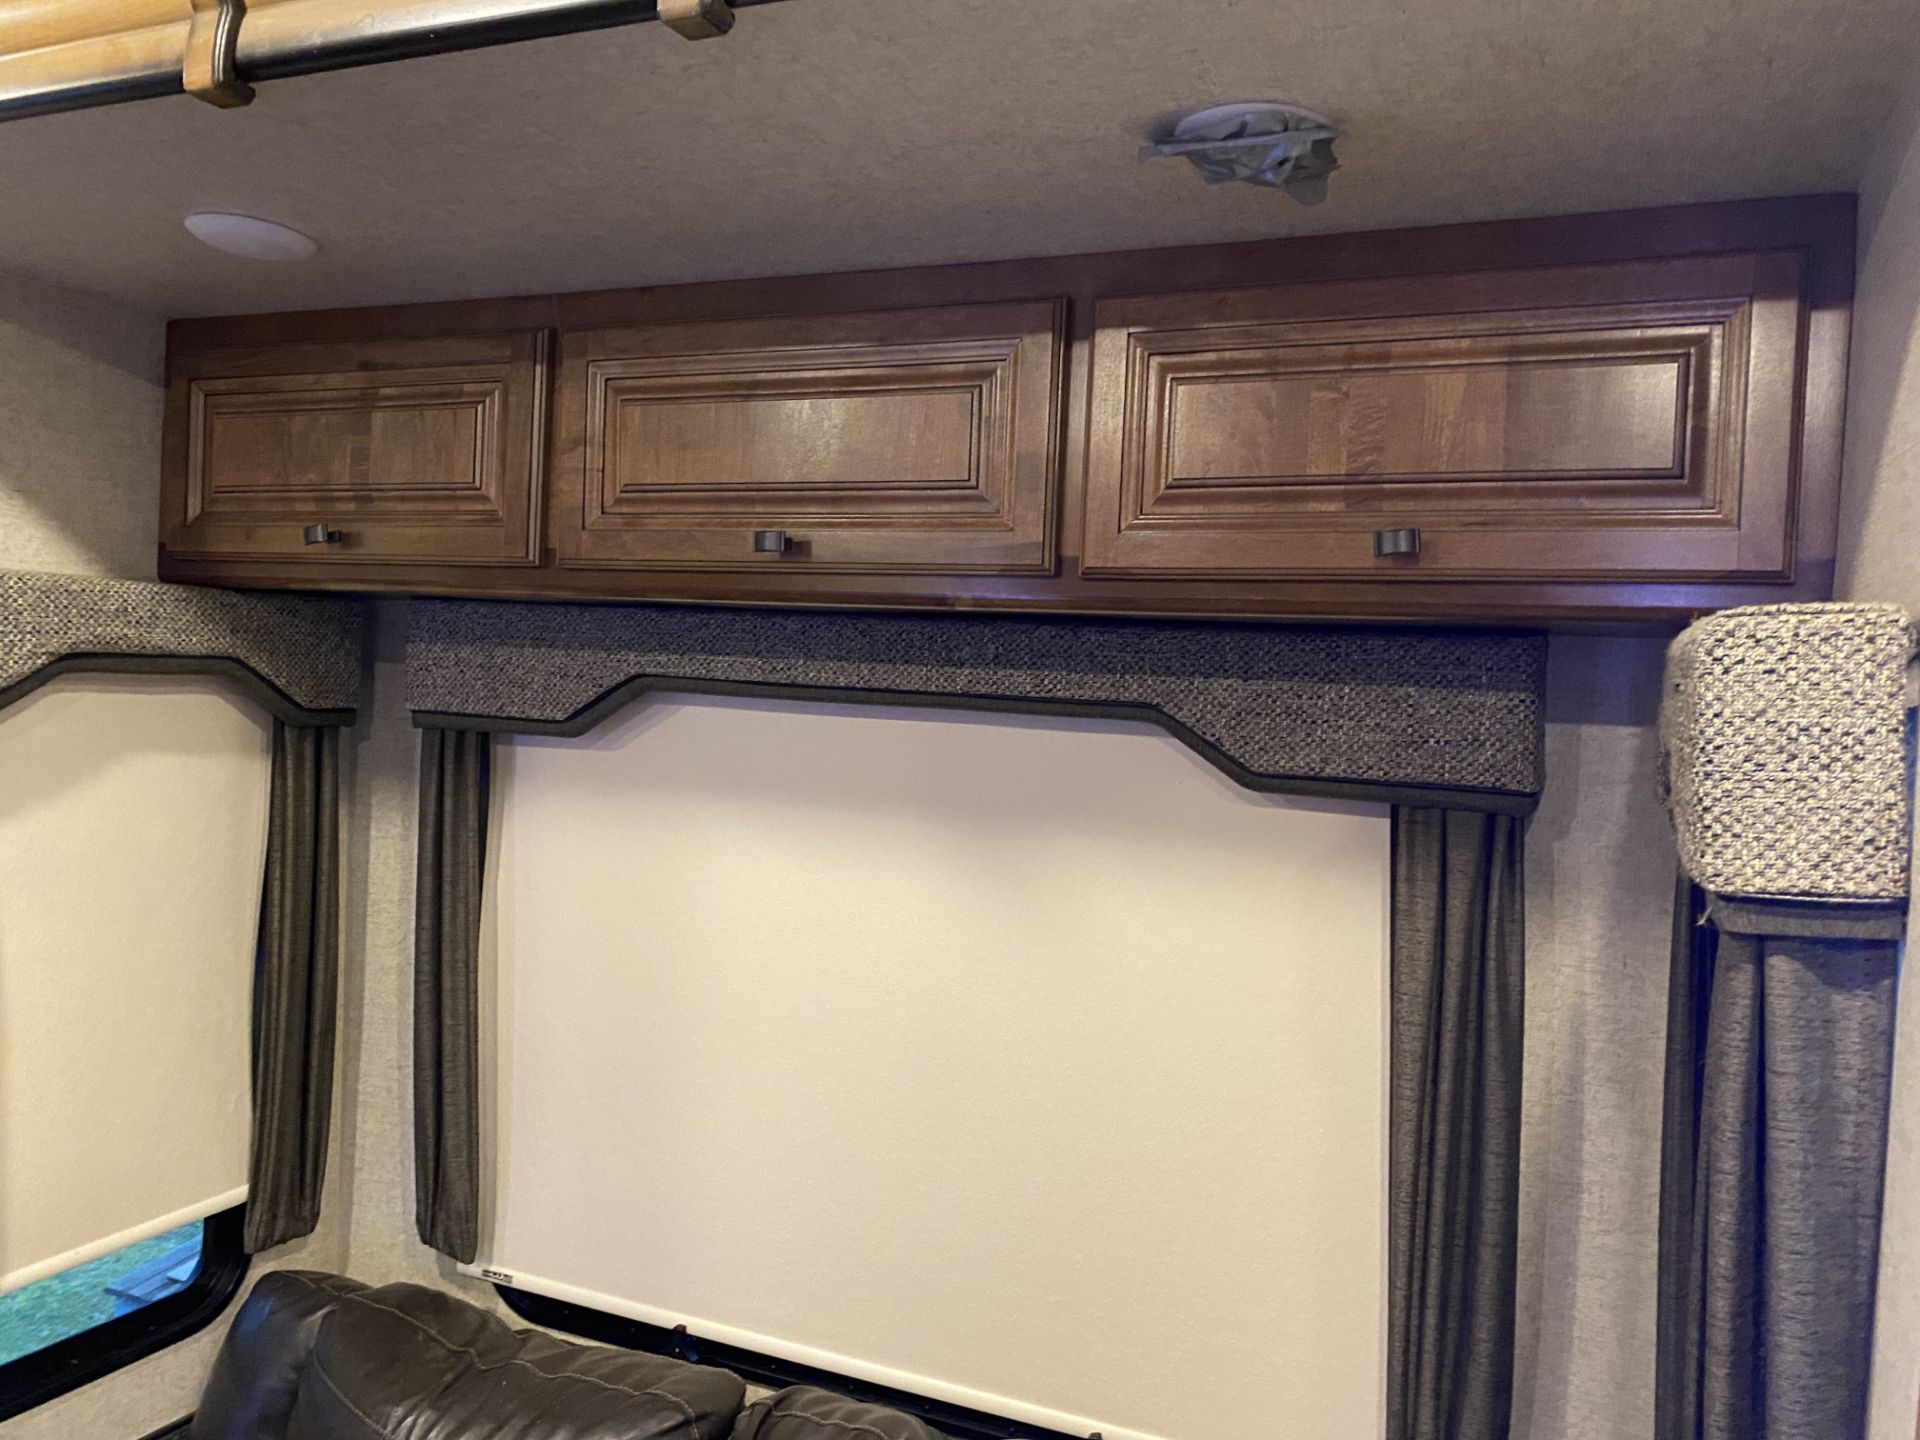 2018 Big Country 5th Wheel Camper Model 3965DSS w/4 Slide Outs - SEE VIDEO & DESCRIPTION - Image 26 of 38